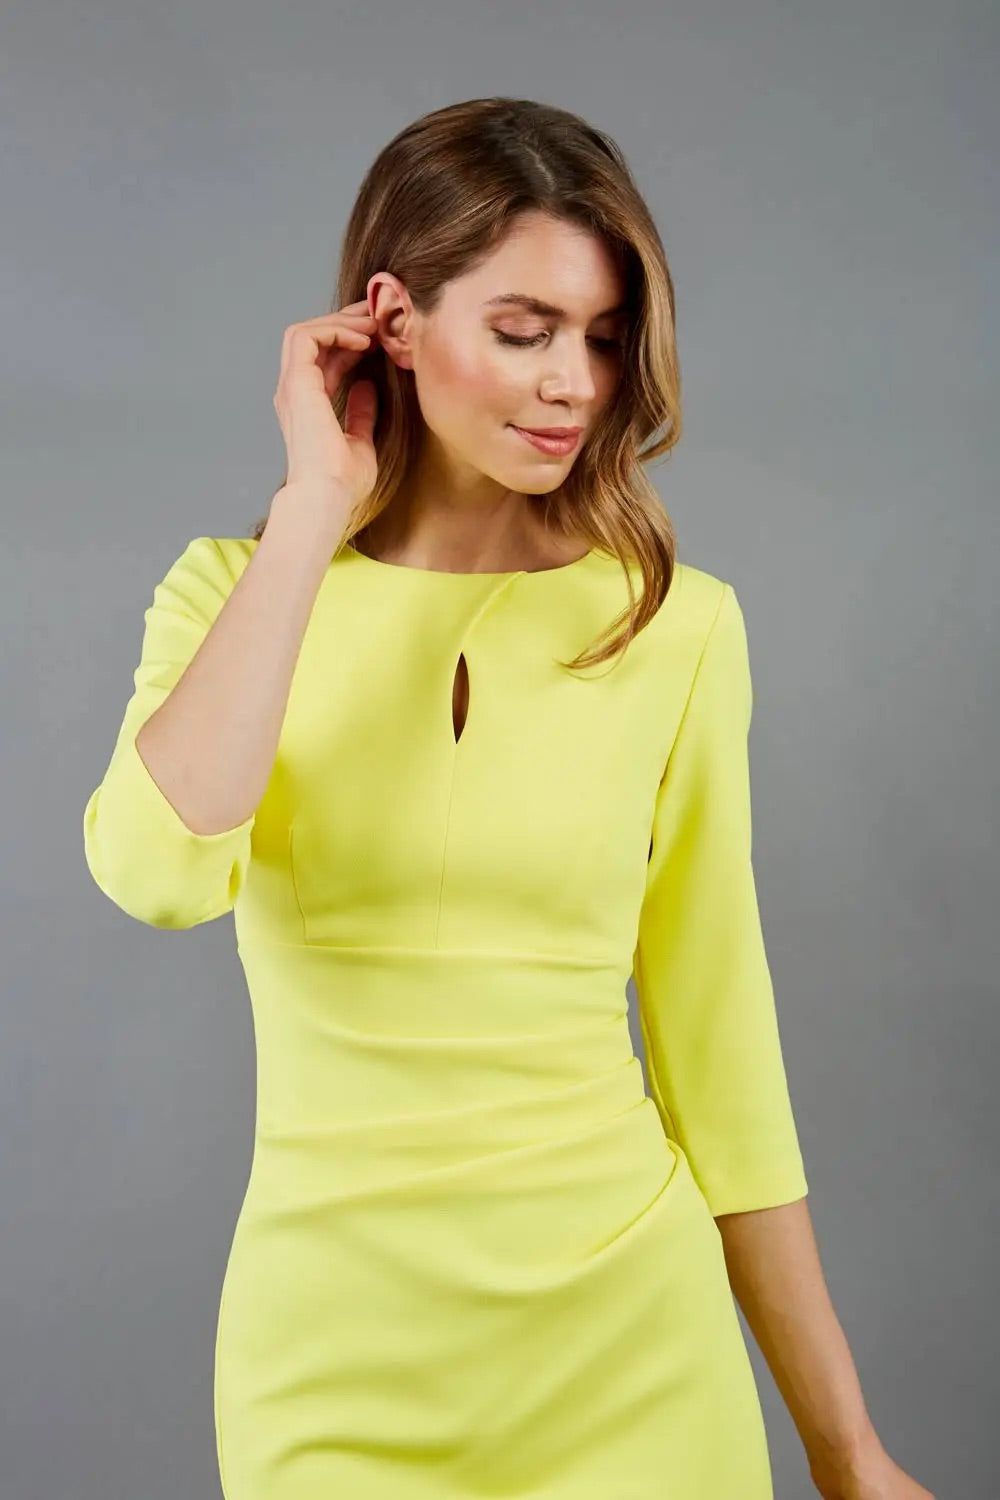 Women' Business Ubrique Dress - Blazing Yellow NORA GARDNER | OFFICIAL STORE for work and office